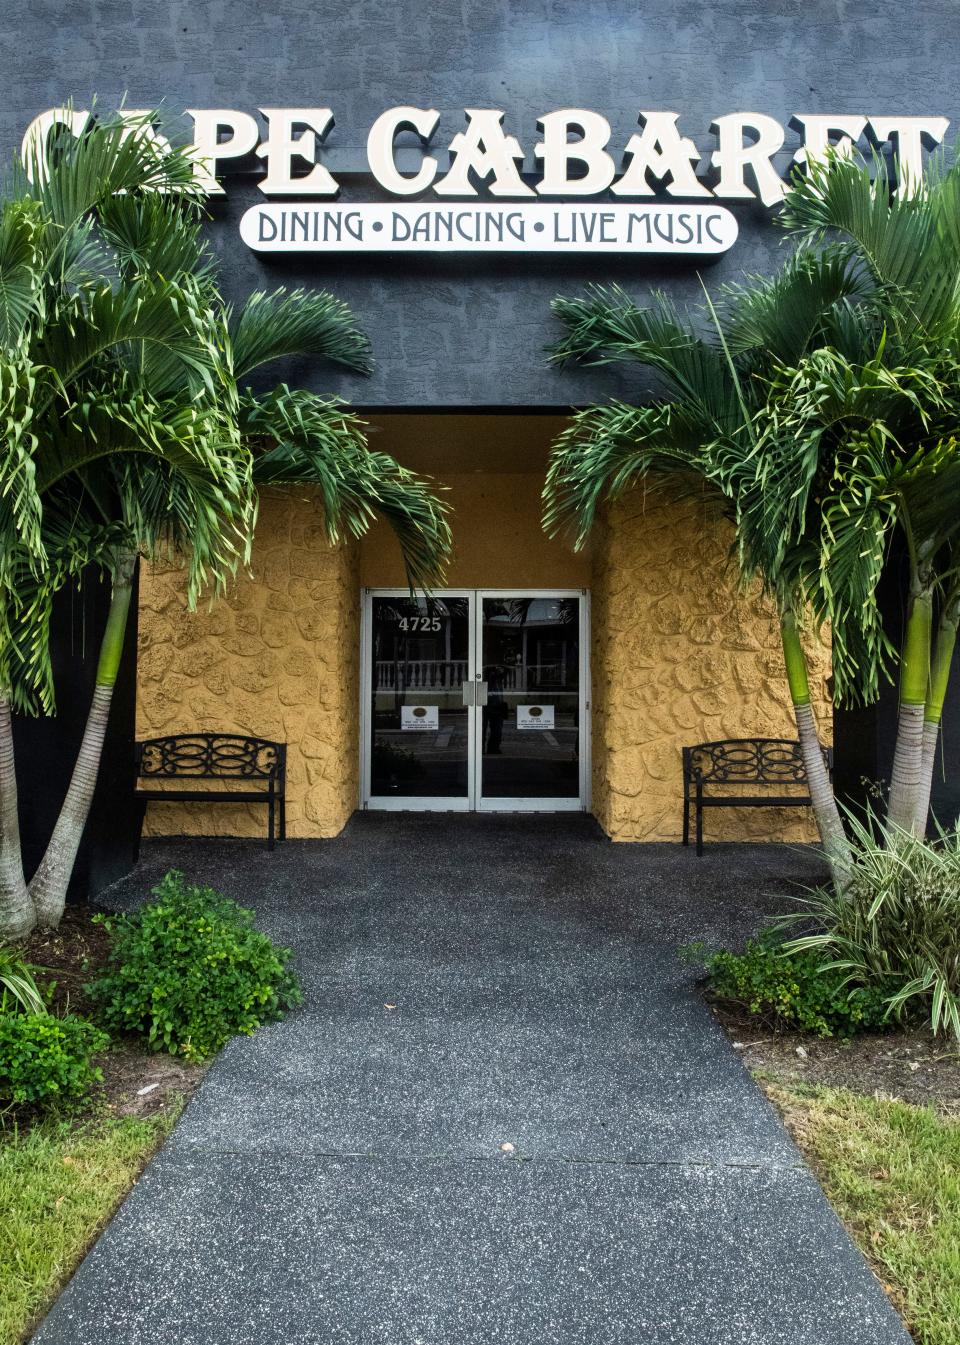 Cape Cabaret features live music, dinner and dancing in downtown Cape Coral.